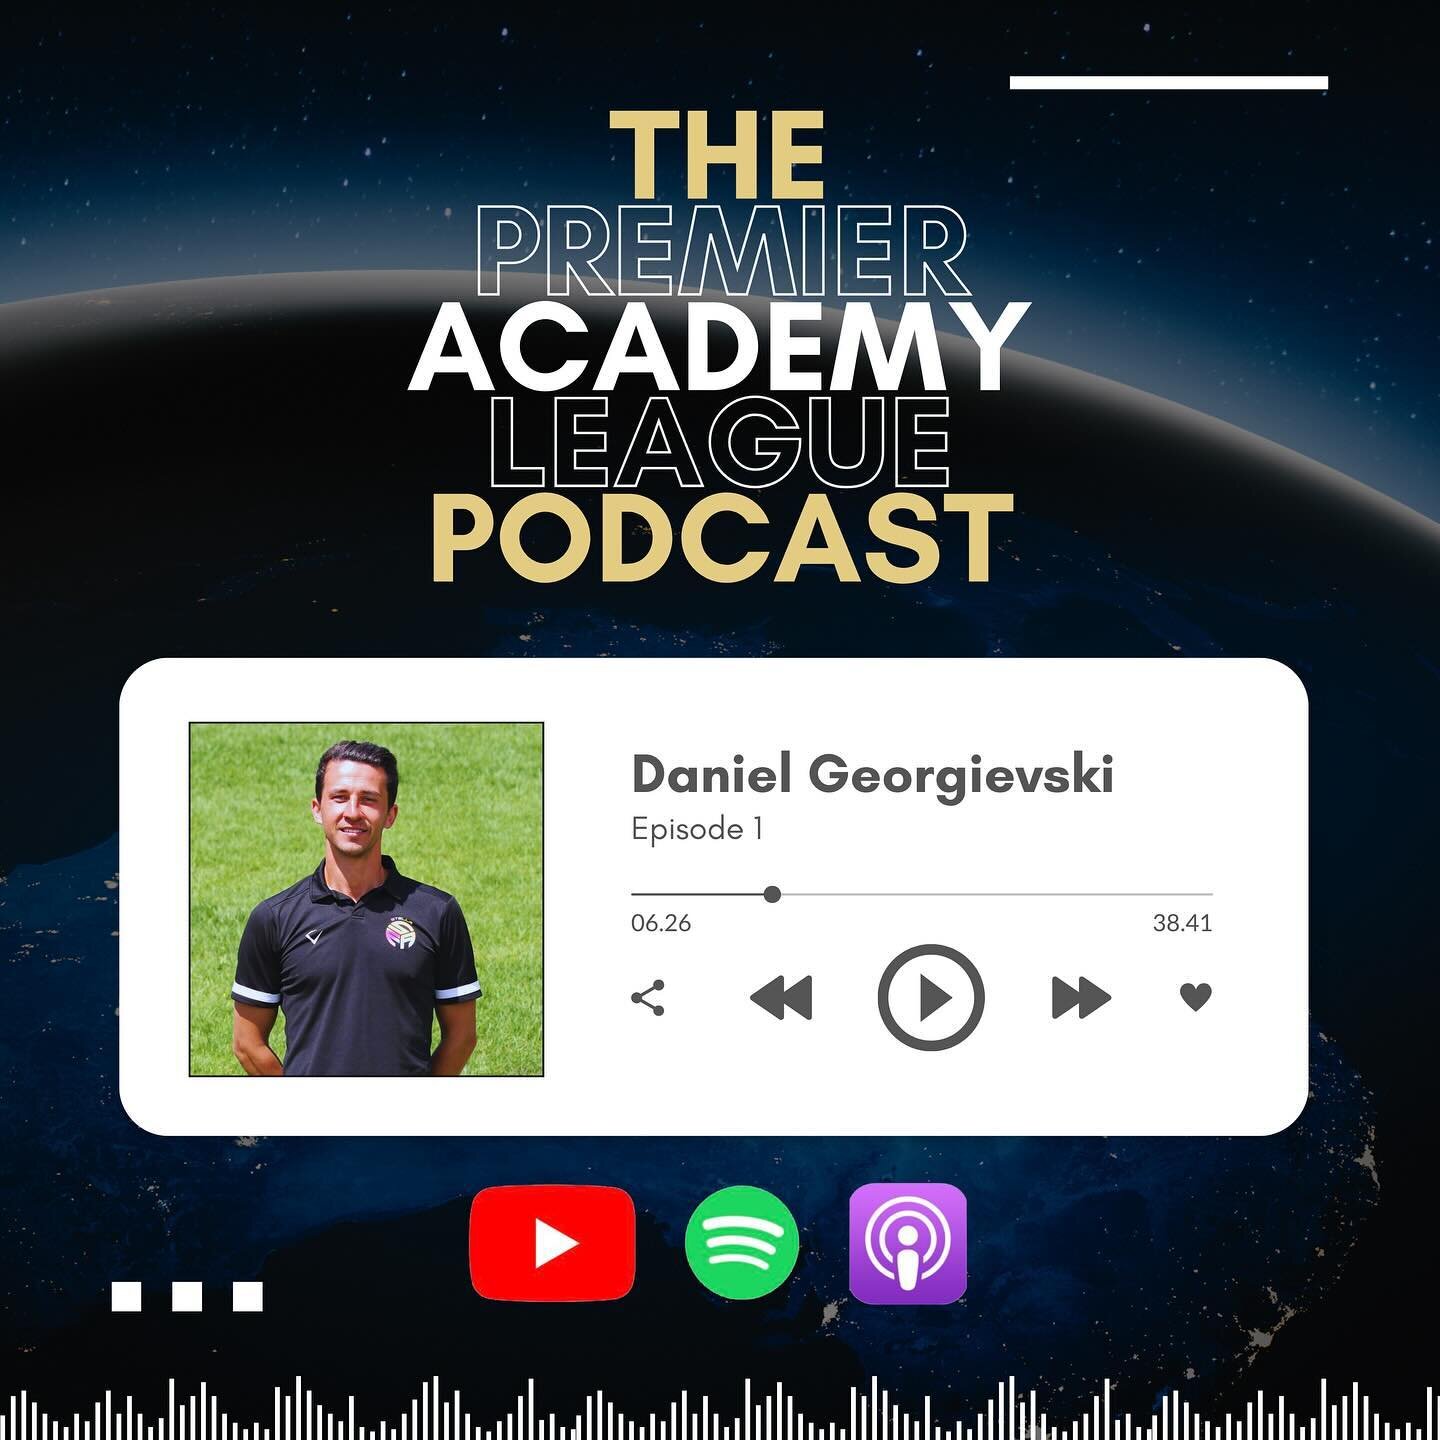 🎙️ The first episode of The Premier Academy League Podcast is OUT NOW.

Episode 1 features Daniel Georgievski, Director of @stellafootballacademy and multi-A-League premiership winner. We hear about Daniel's football career and how these experiences